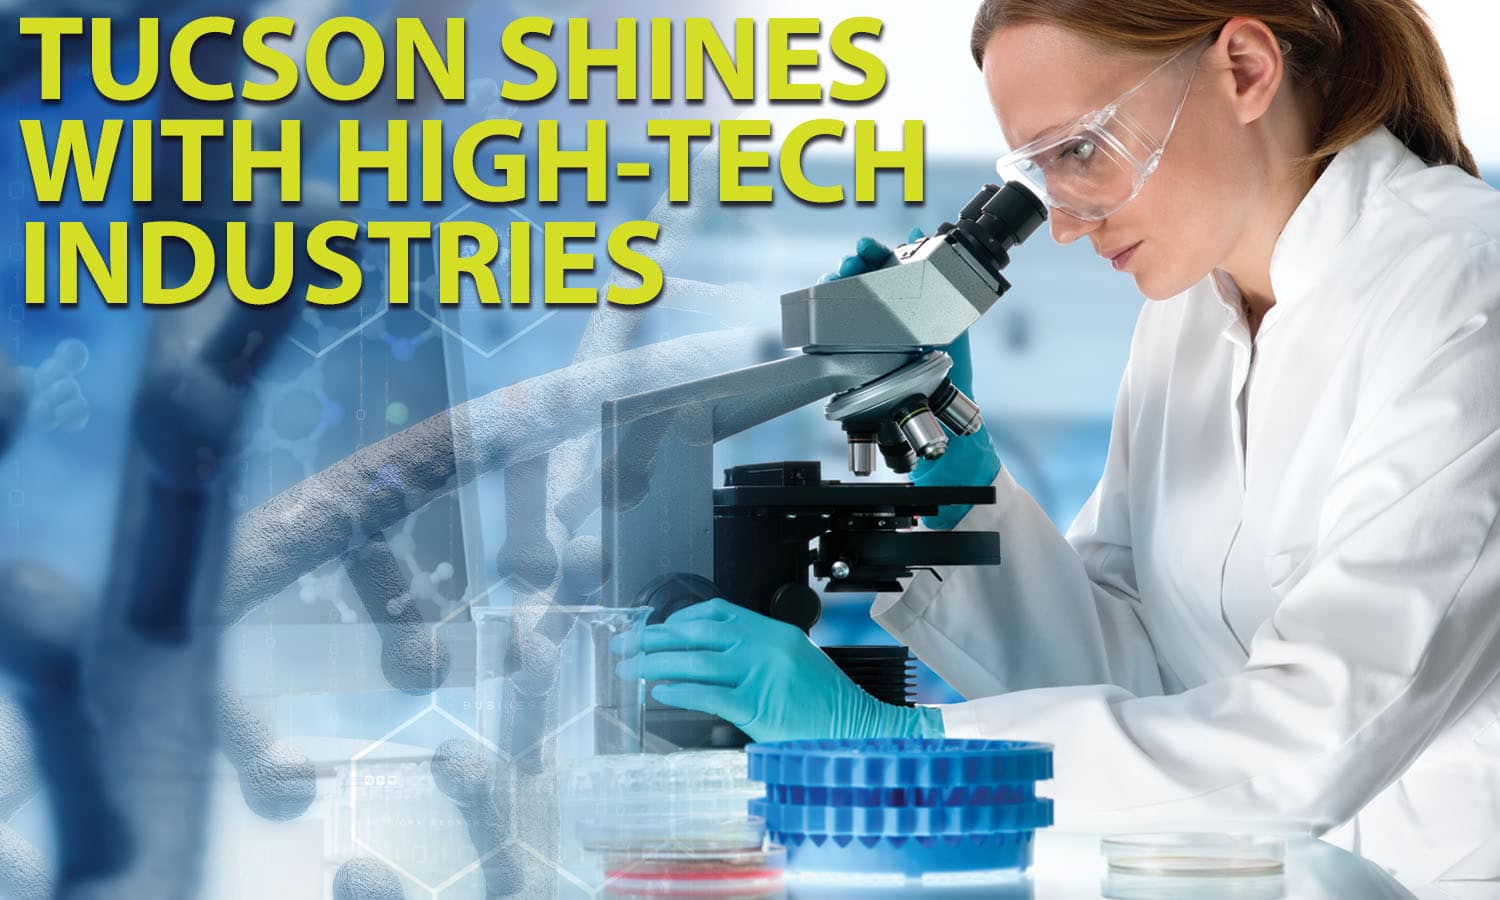 Graphic of scientist and the headline “Tucson Shines with High-Tech Industries”